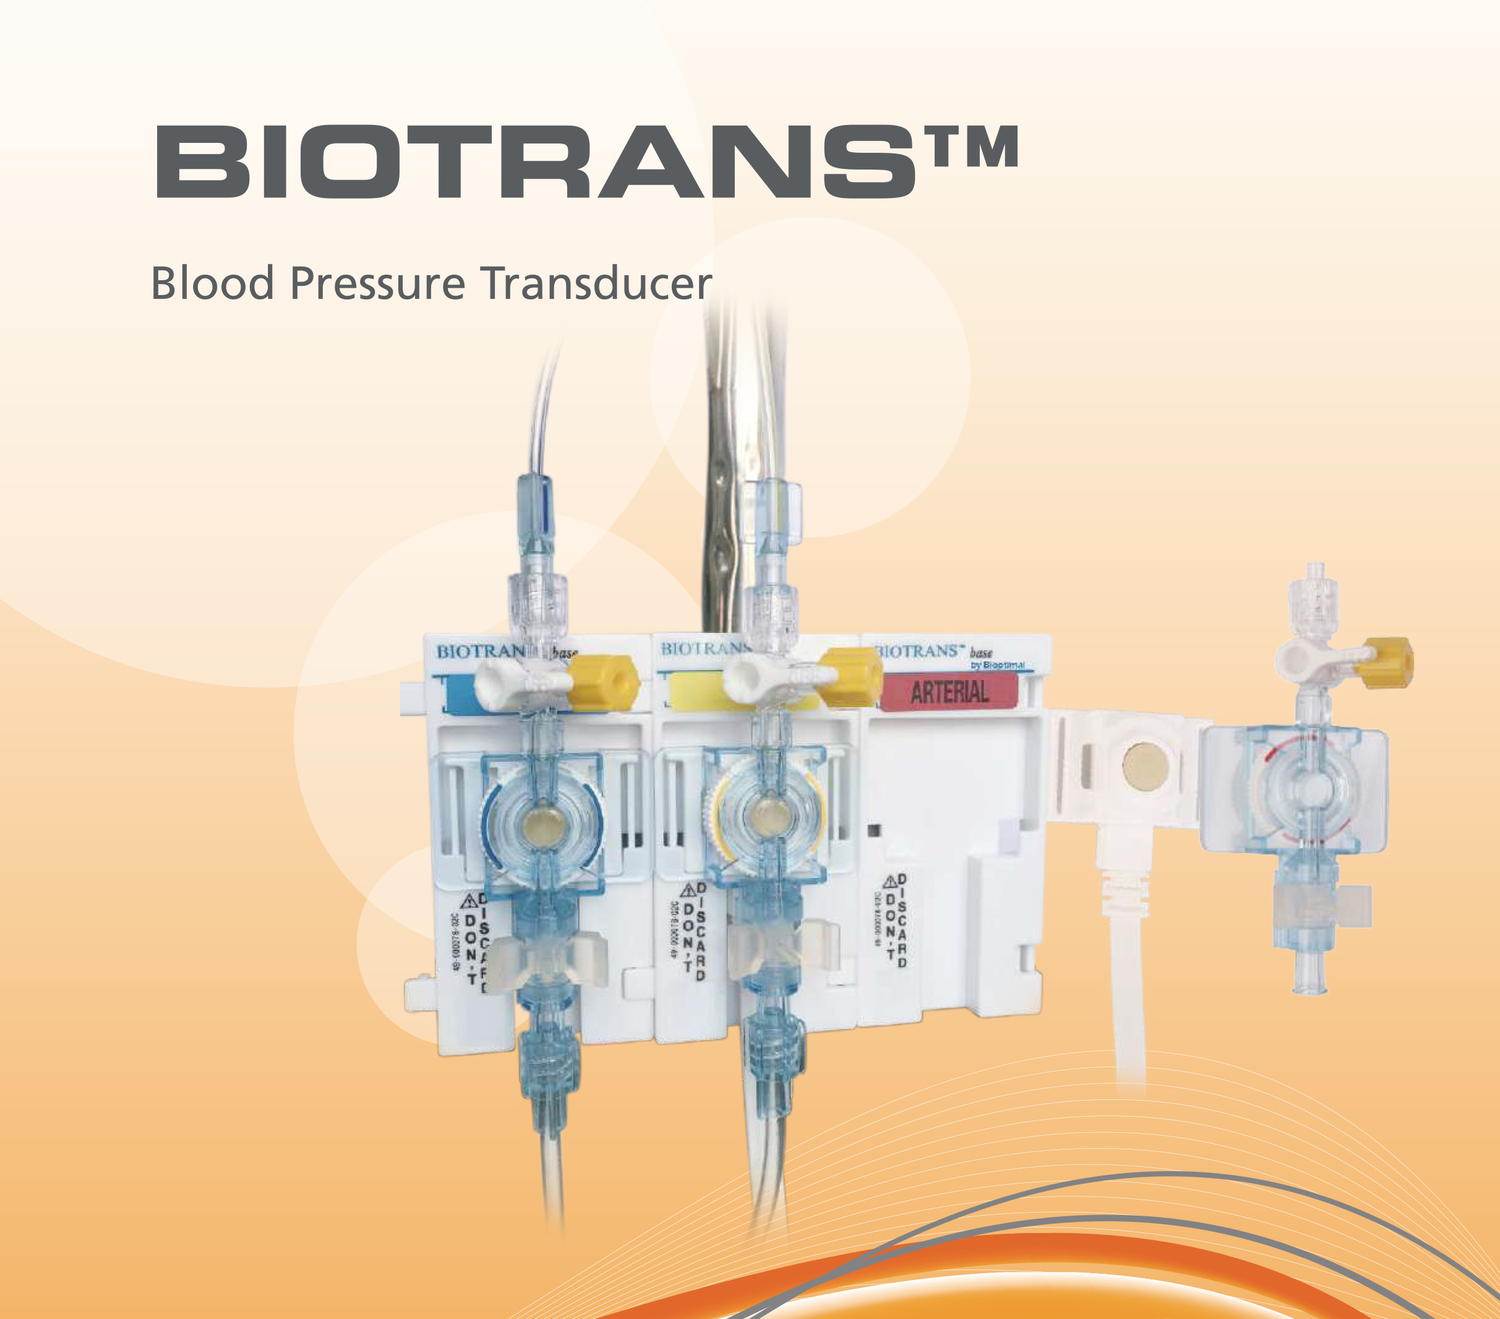 <p><span style="font-weight: bold;">BIOTRANS blood pressure transducer</span><br></p>